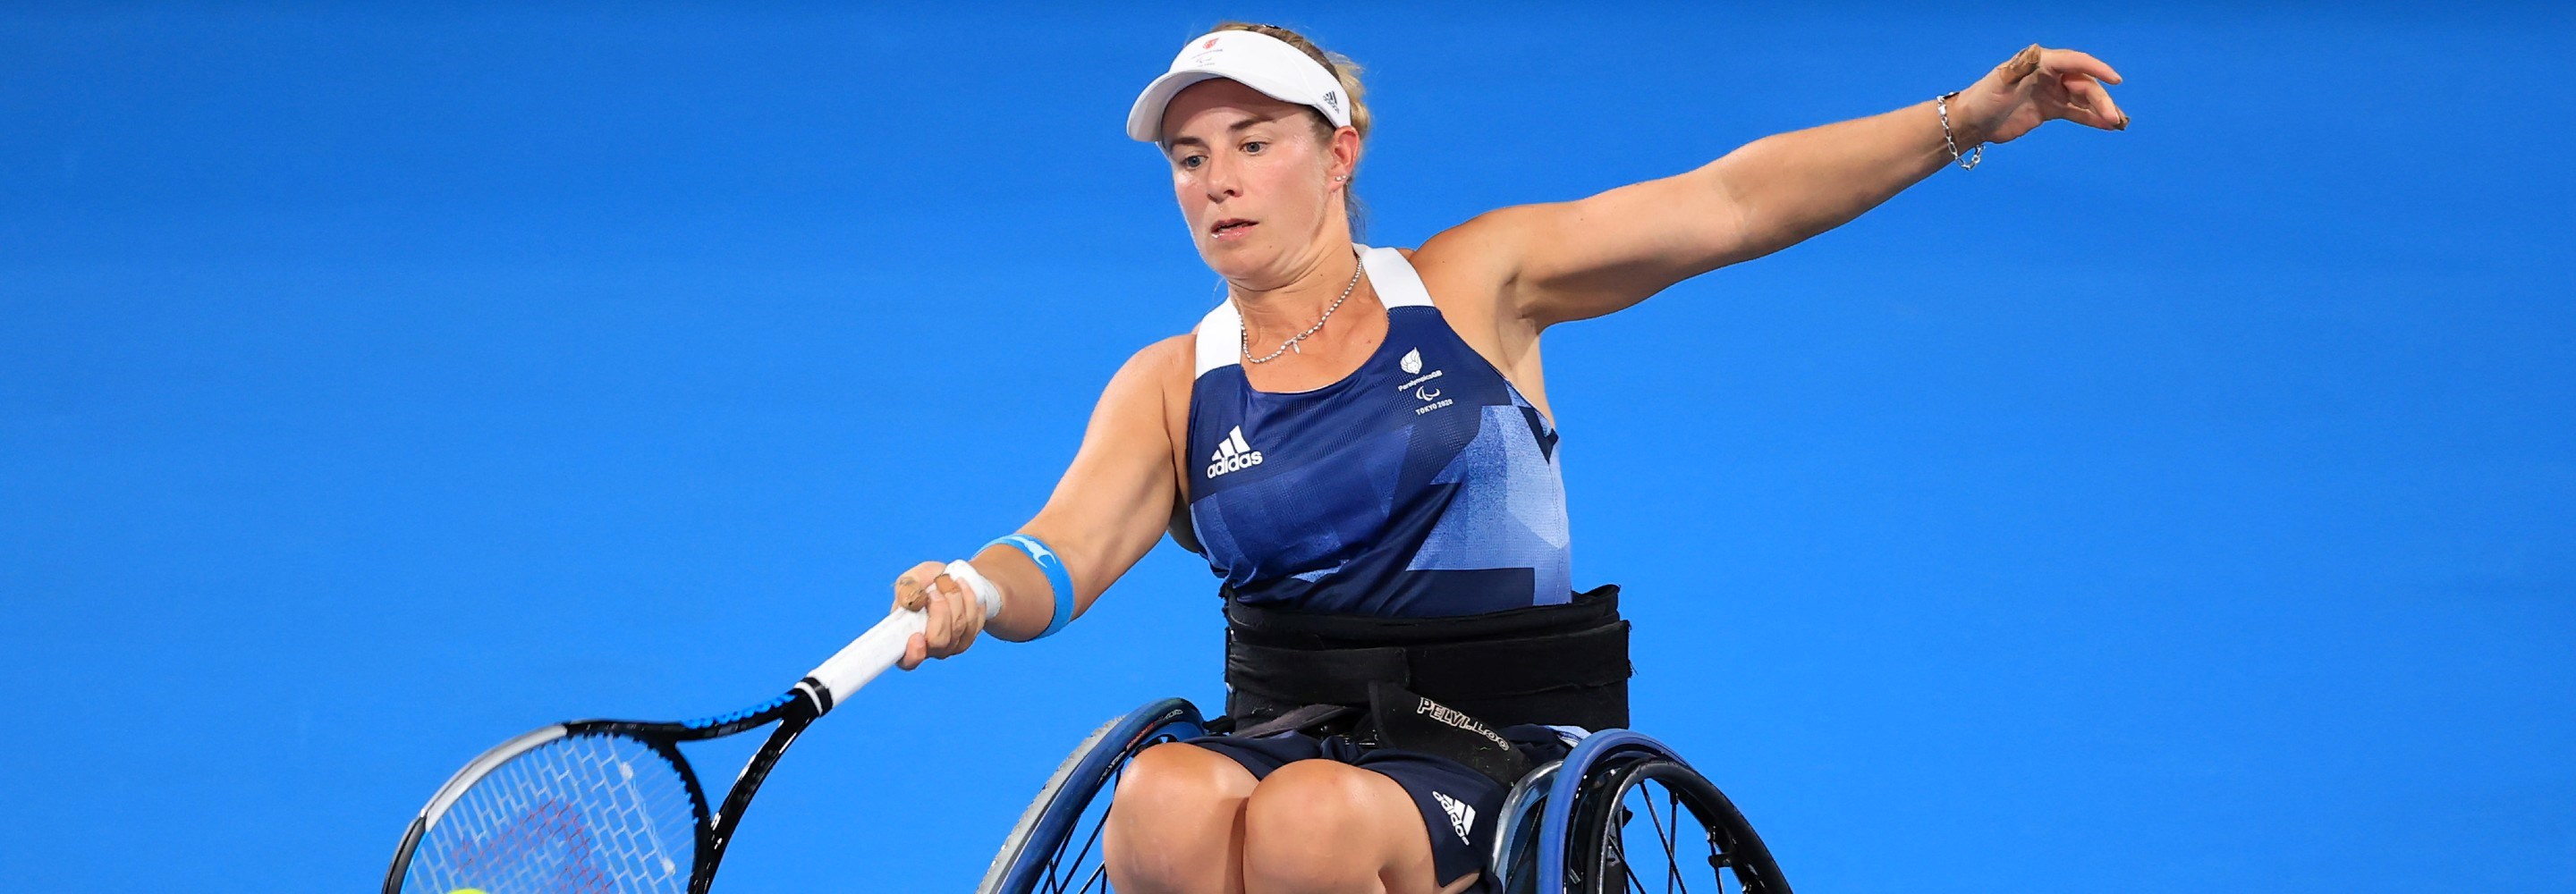 Lucy Shuker of Team Great Britain plays a forehand during the Wheelchair Women's Doubles gold medal match against Diede de Groot and Aniek van Koot of Team Netherlands on day 11 of the Tokyo 2020 Paralympic Games at Ariake Tennis Park on September 04, 2021